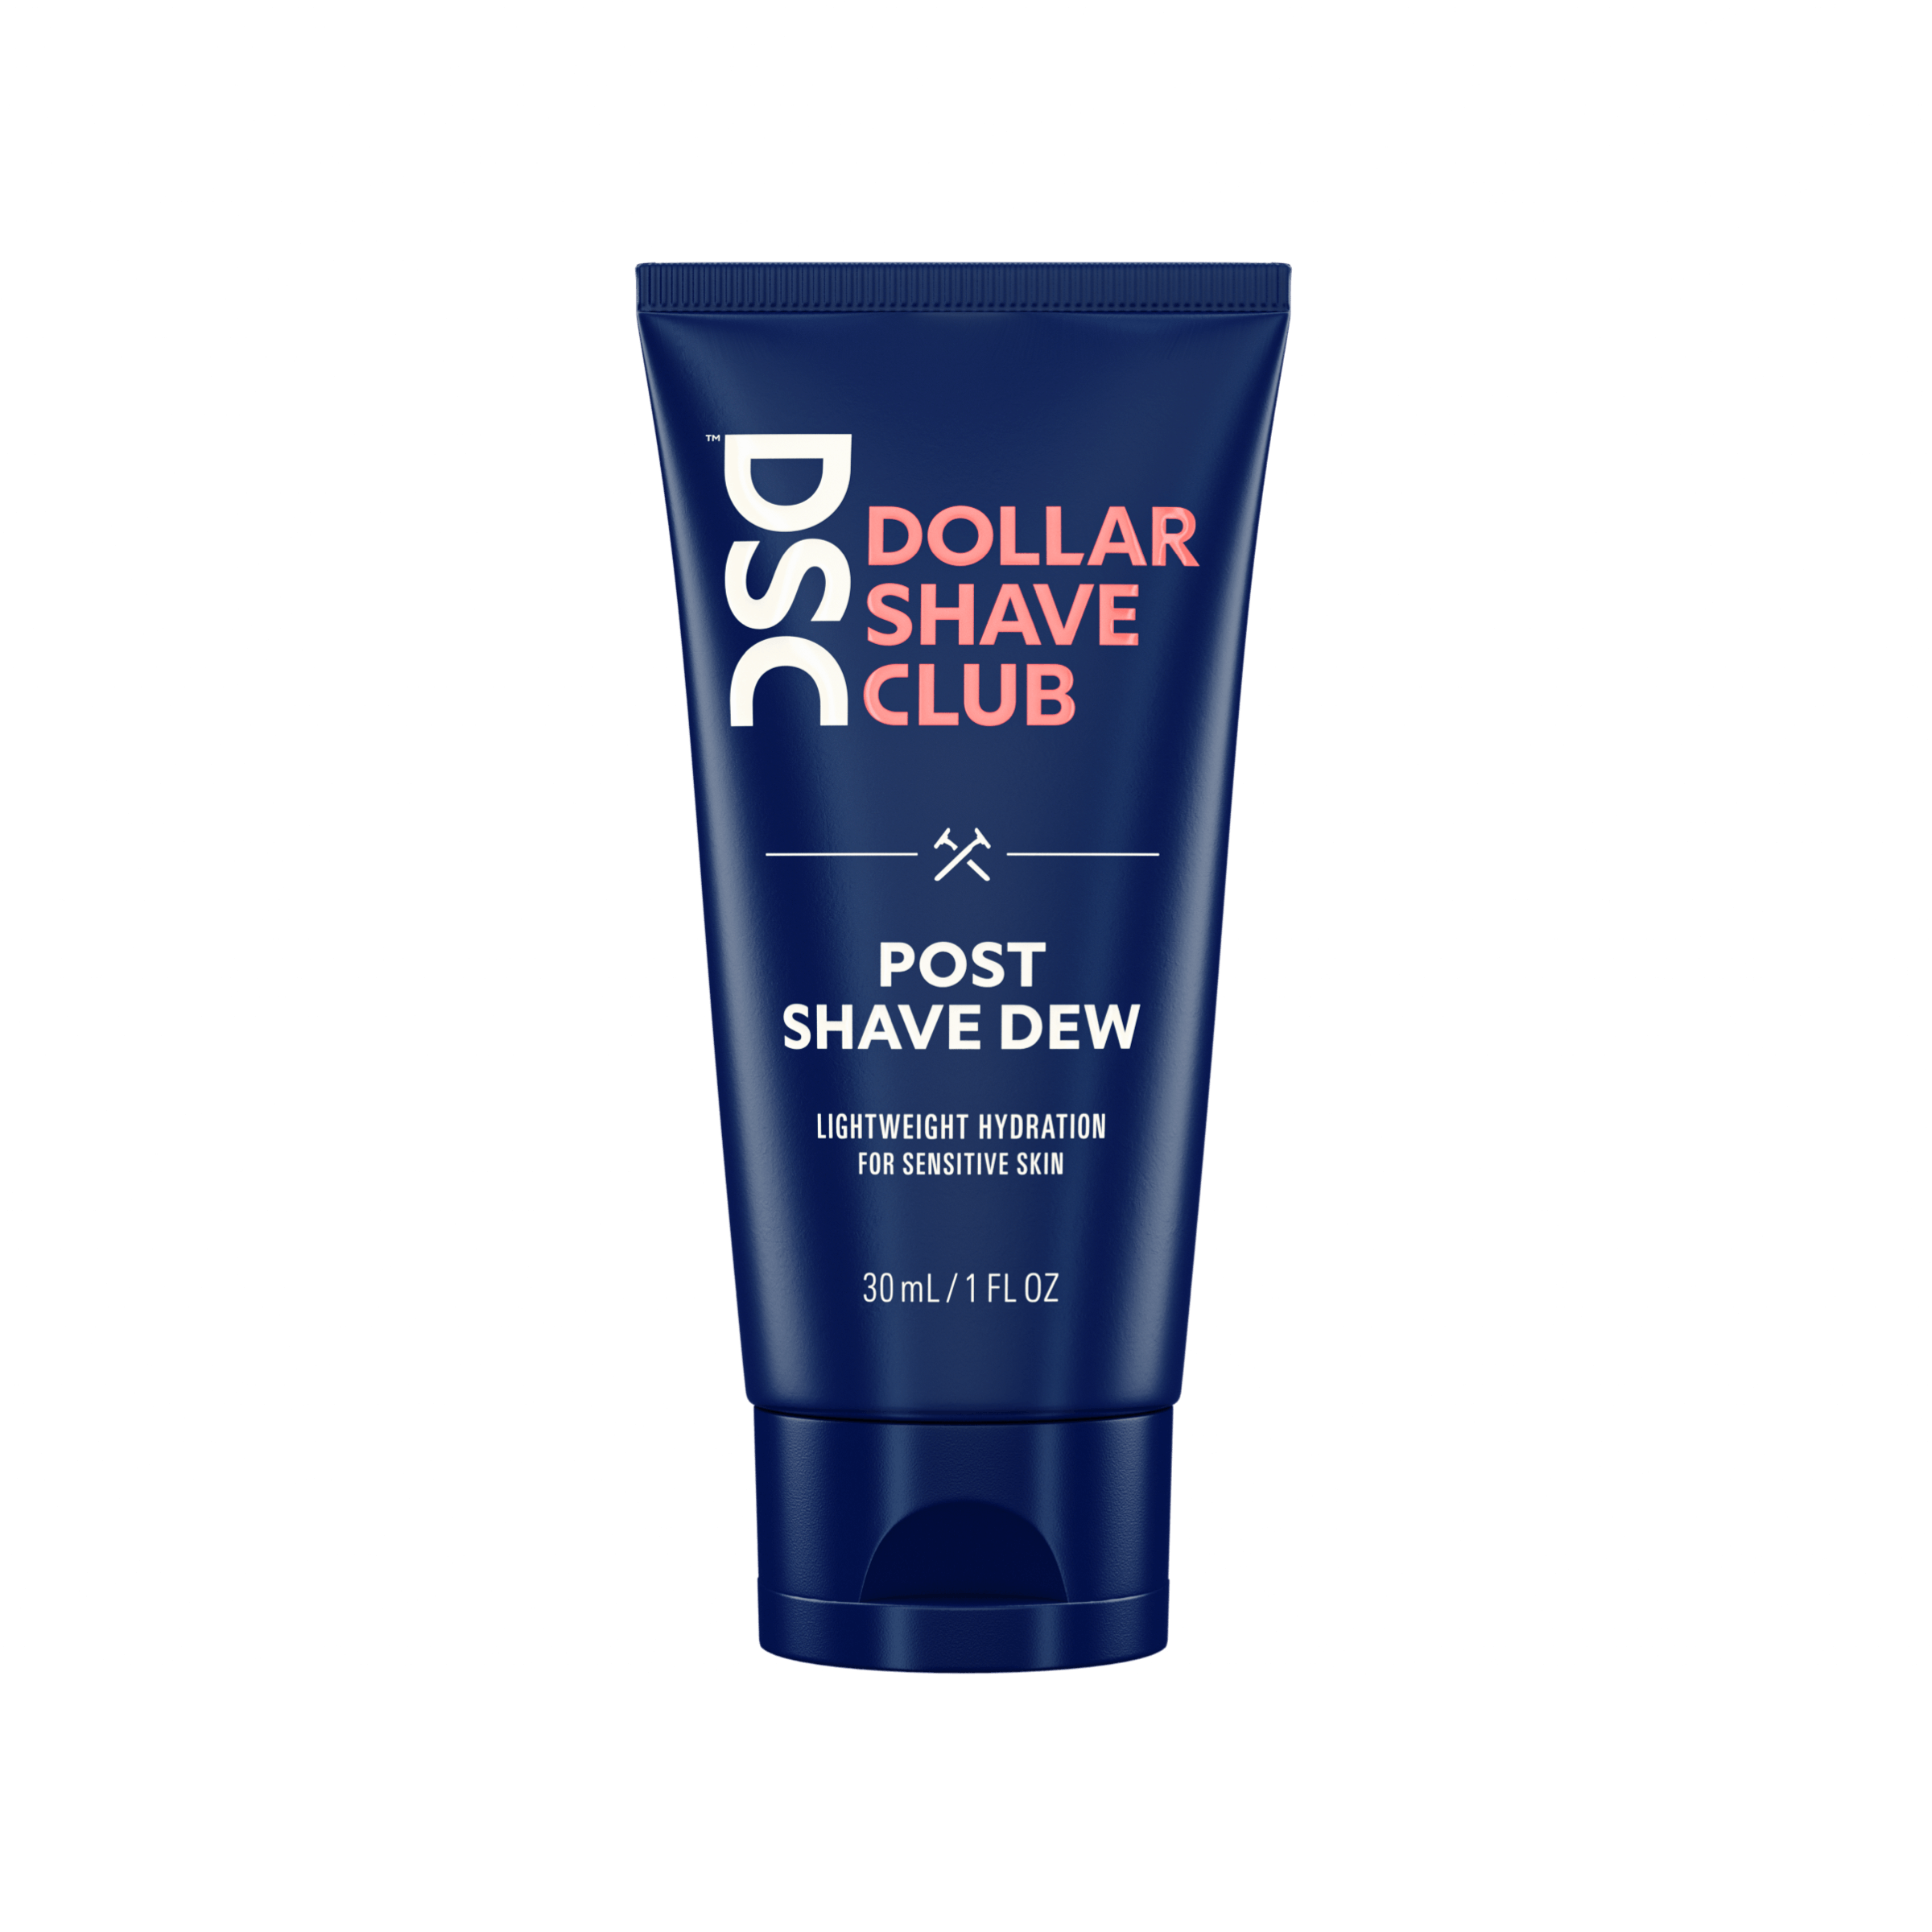 Dollar Shave Club Post Shave Dew Trial Size product image against blank backdrop.